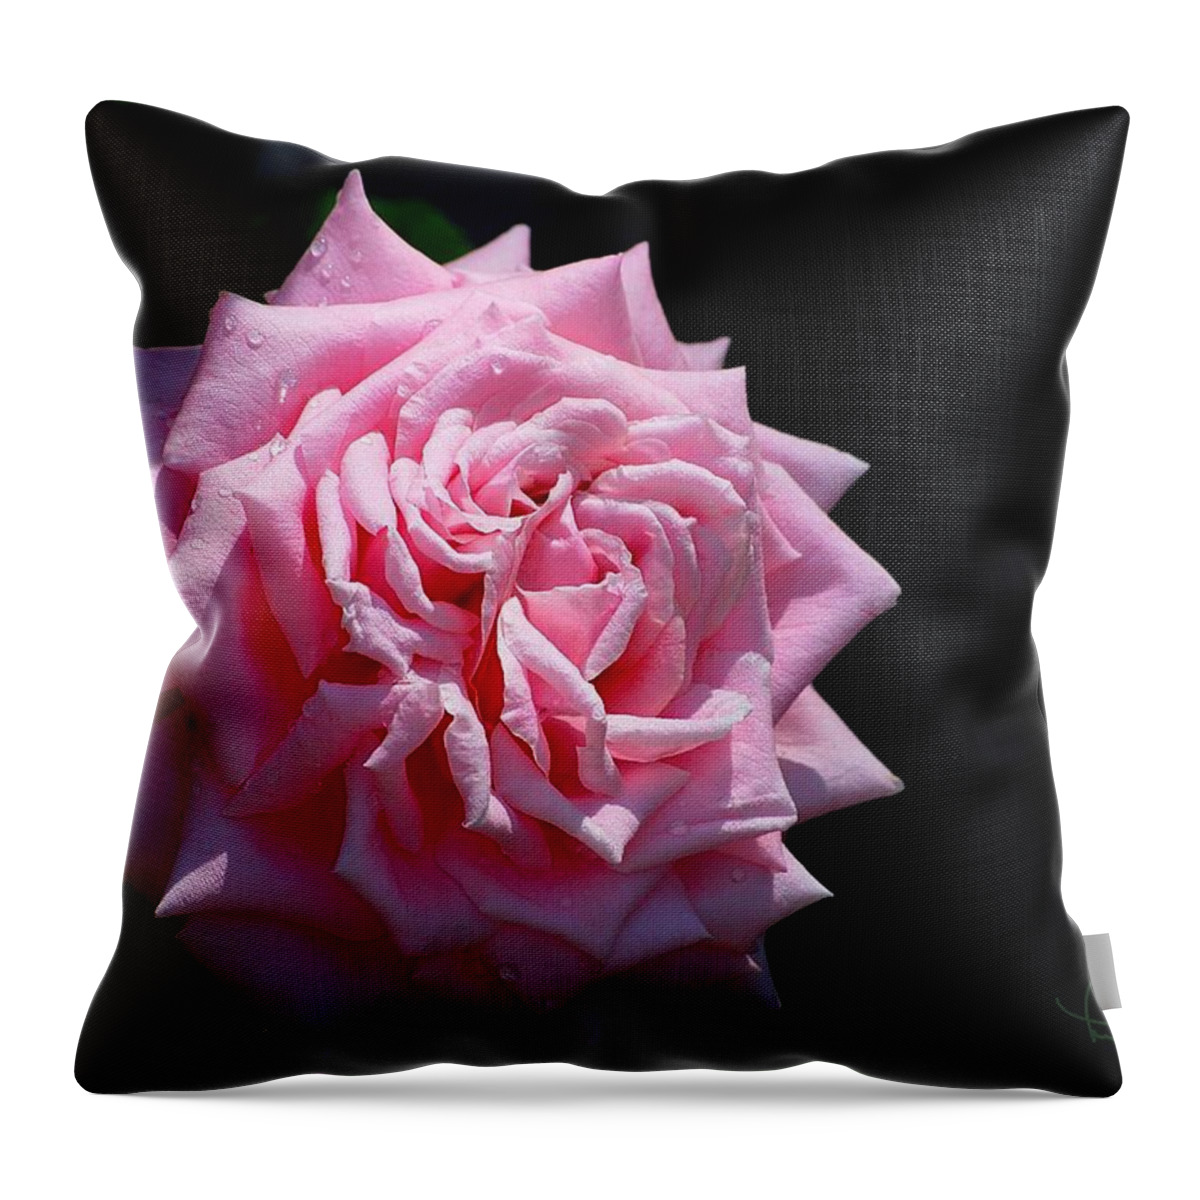 Flower Throw Pillow featuring the photograph Rose by Ludwig Keck